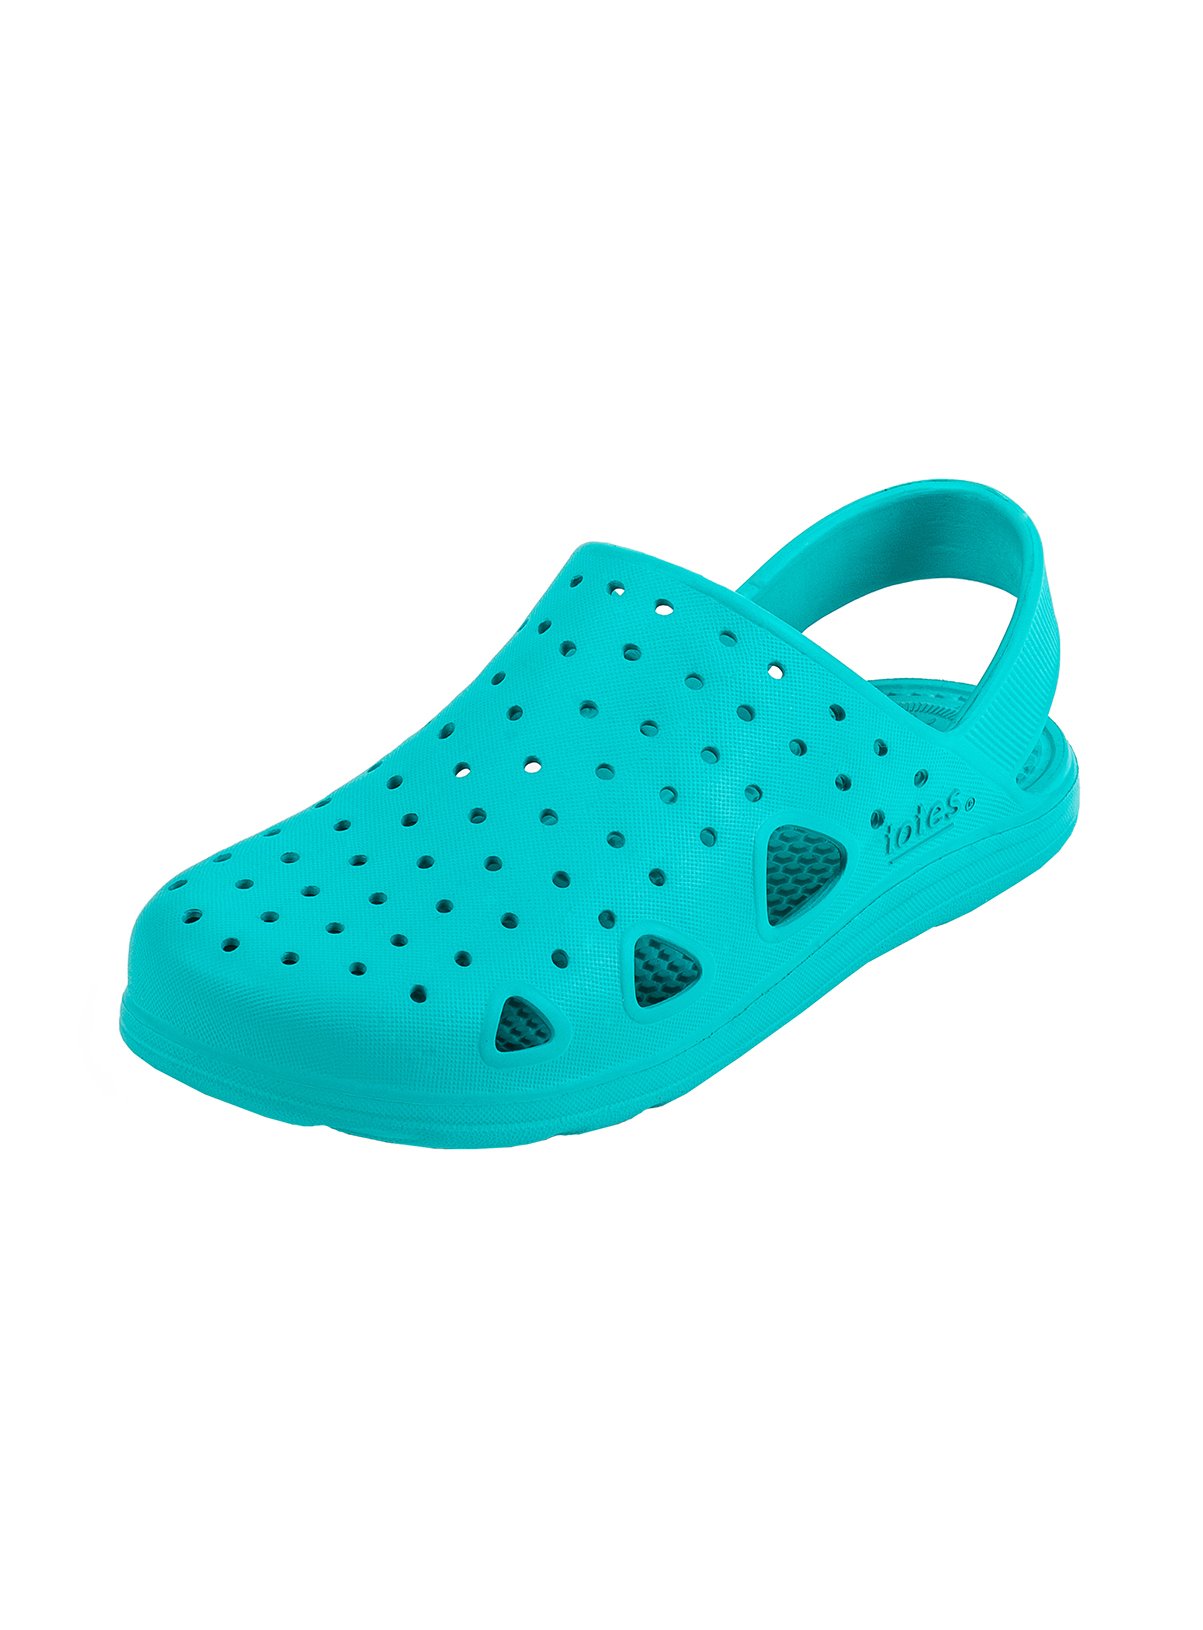 Sol Bounce Teal Clogs Review